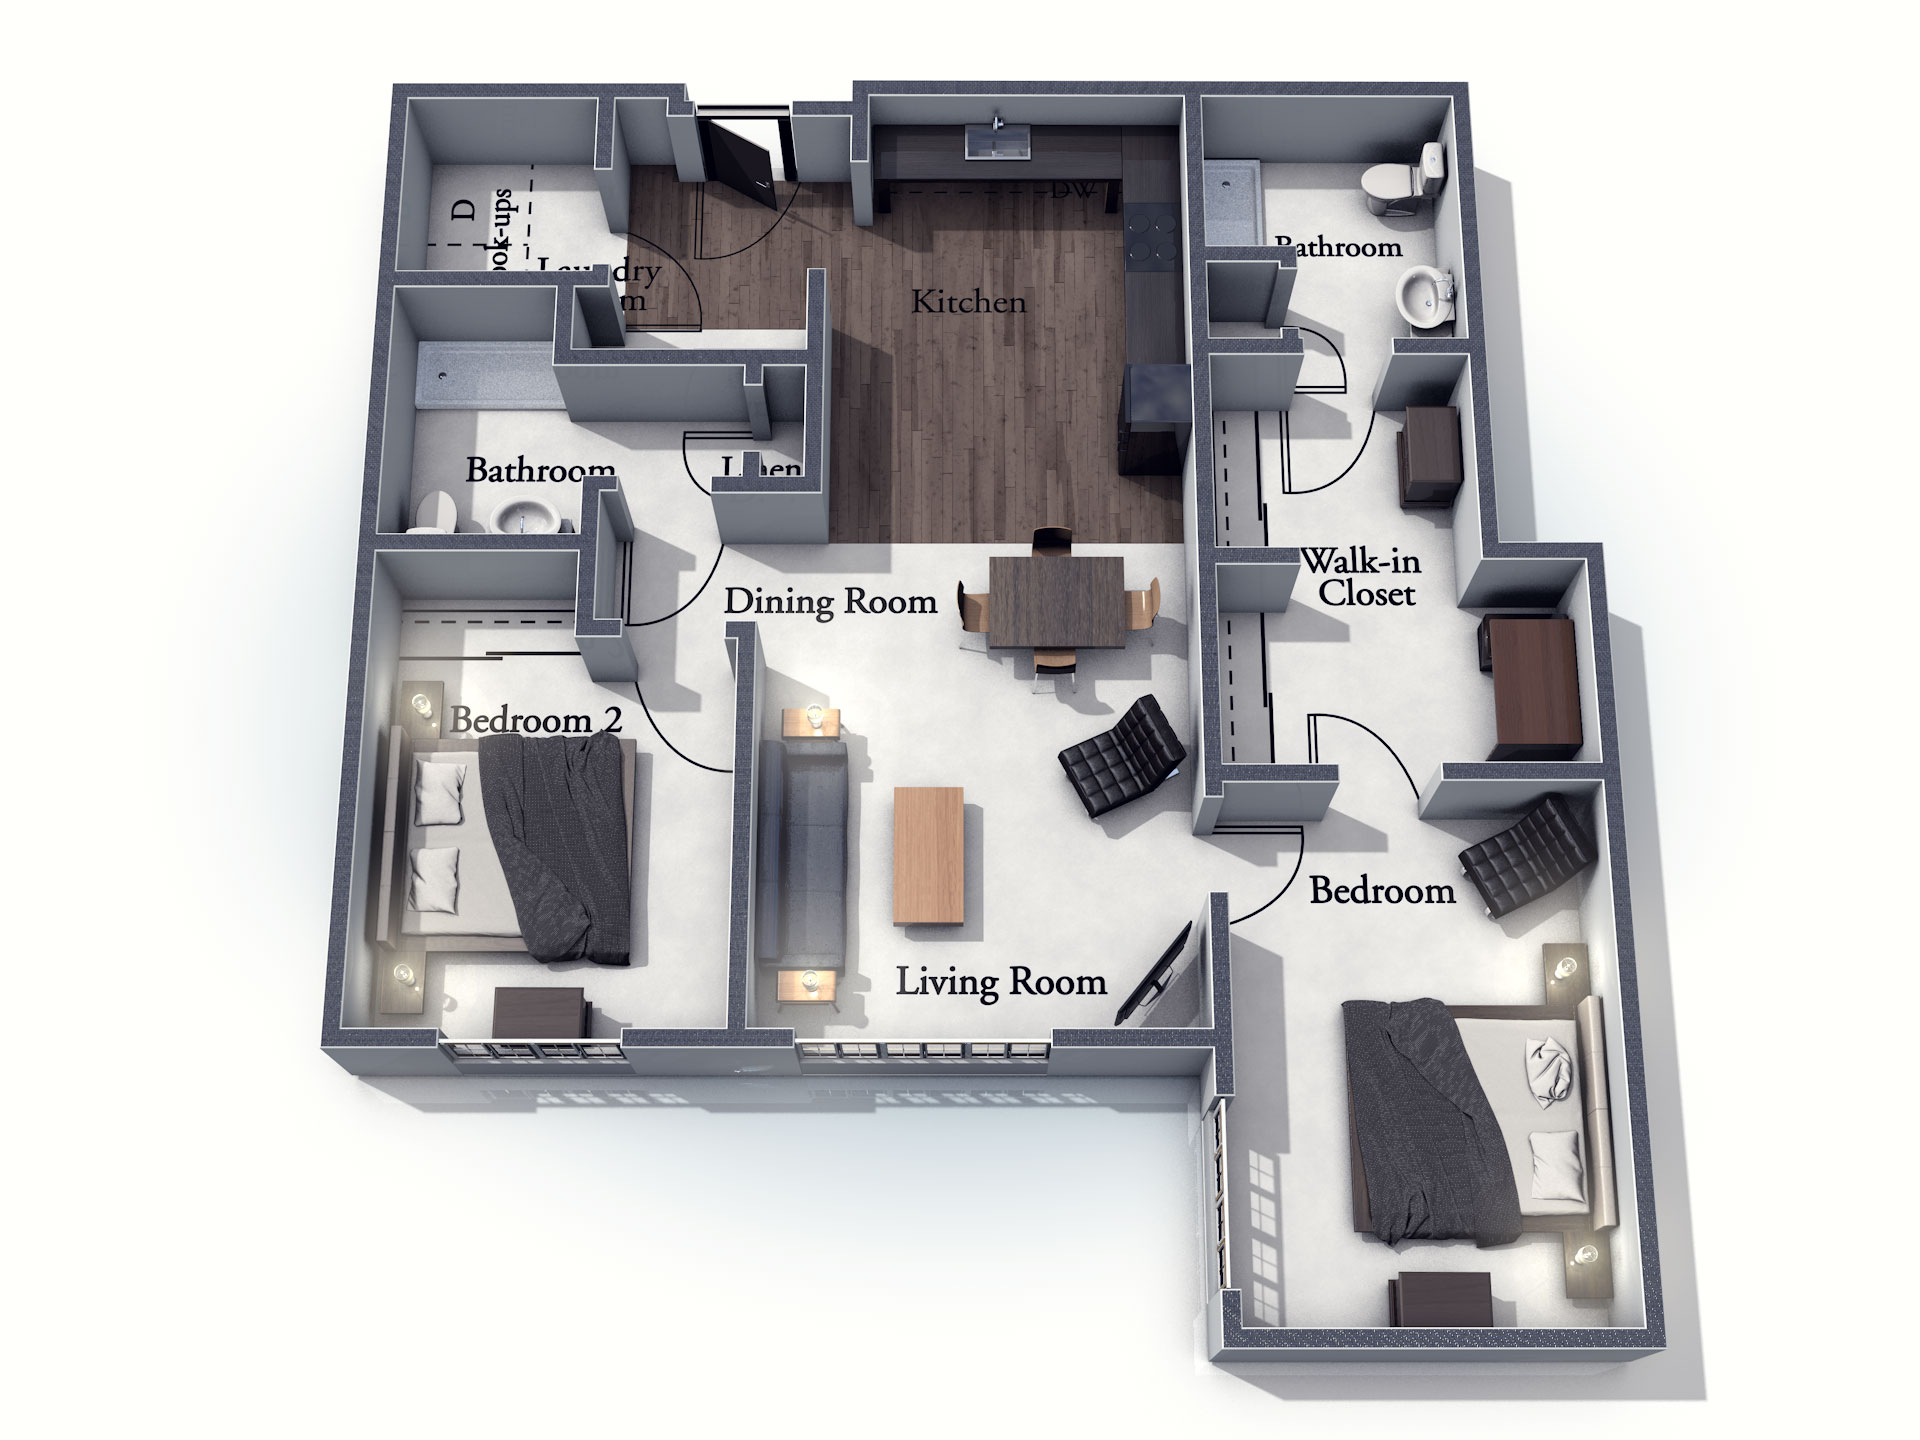 This 3D rendering of the Coventry living space shows an example of the floor plan layout. Please contact the Summit Pointe Senior Living Community for more information.